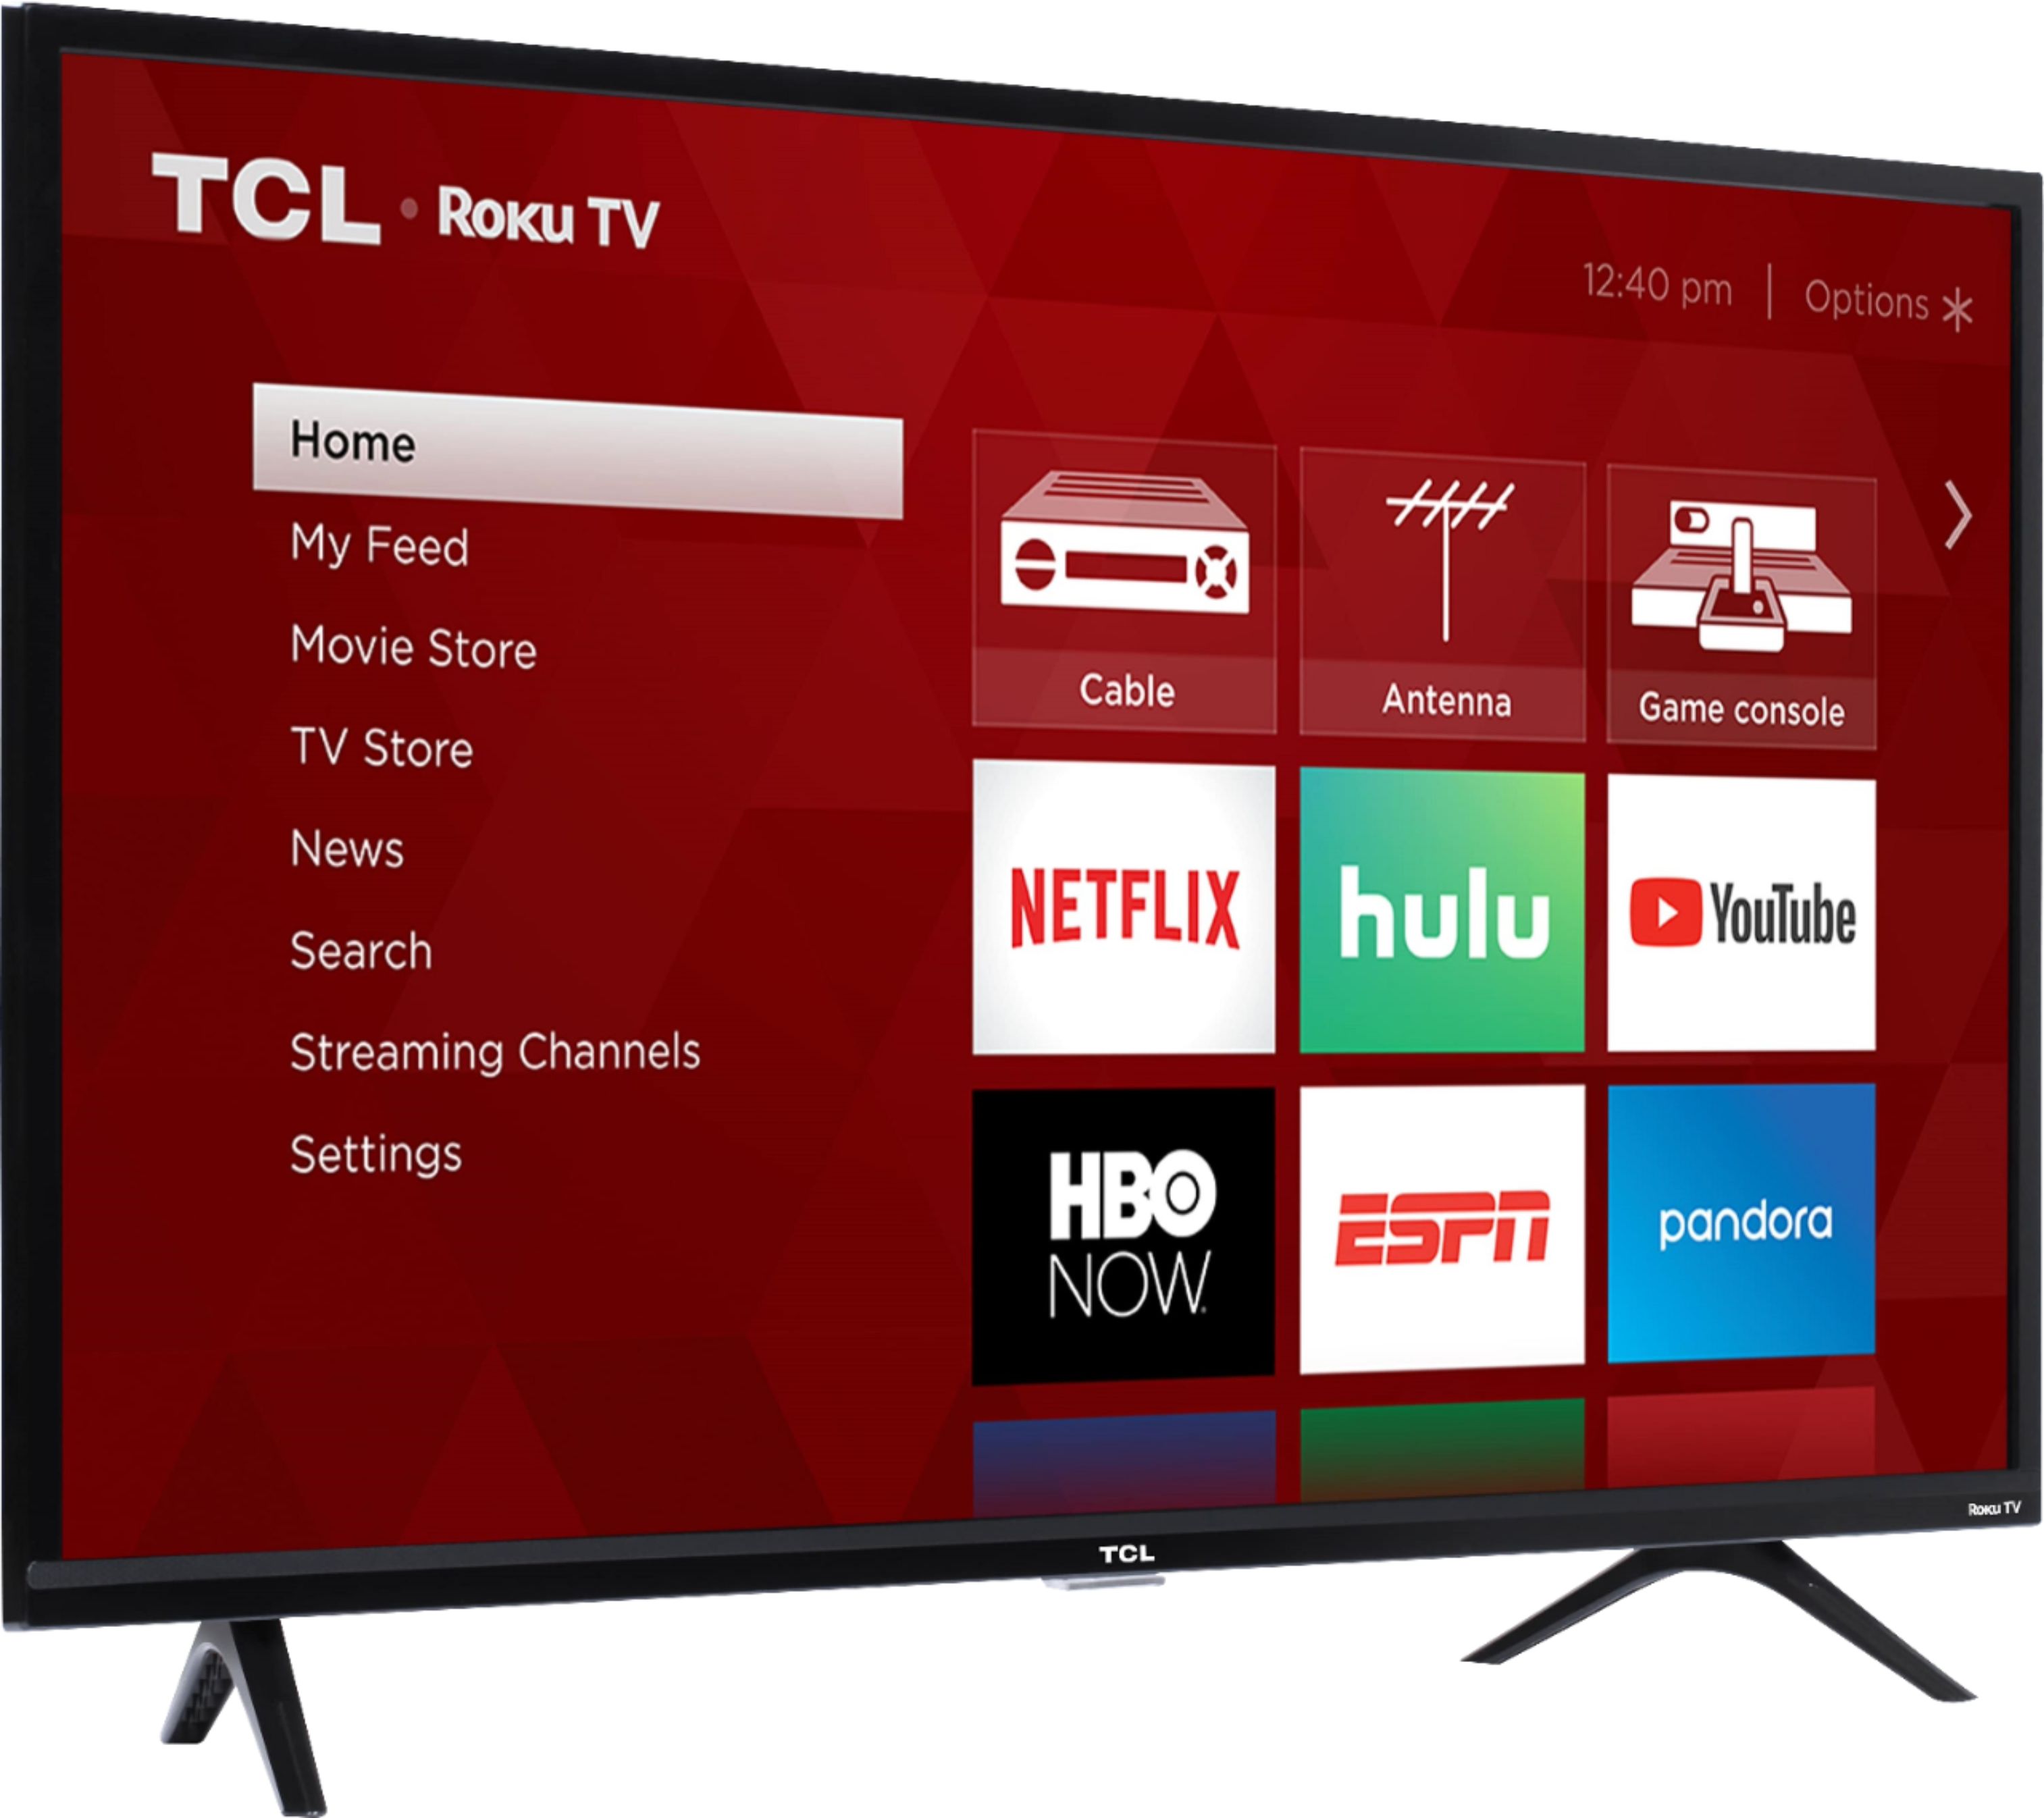 TCL 43 Class S Class 1080p FHD LED Smart TV with Roku TV - 43S310R (New) 